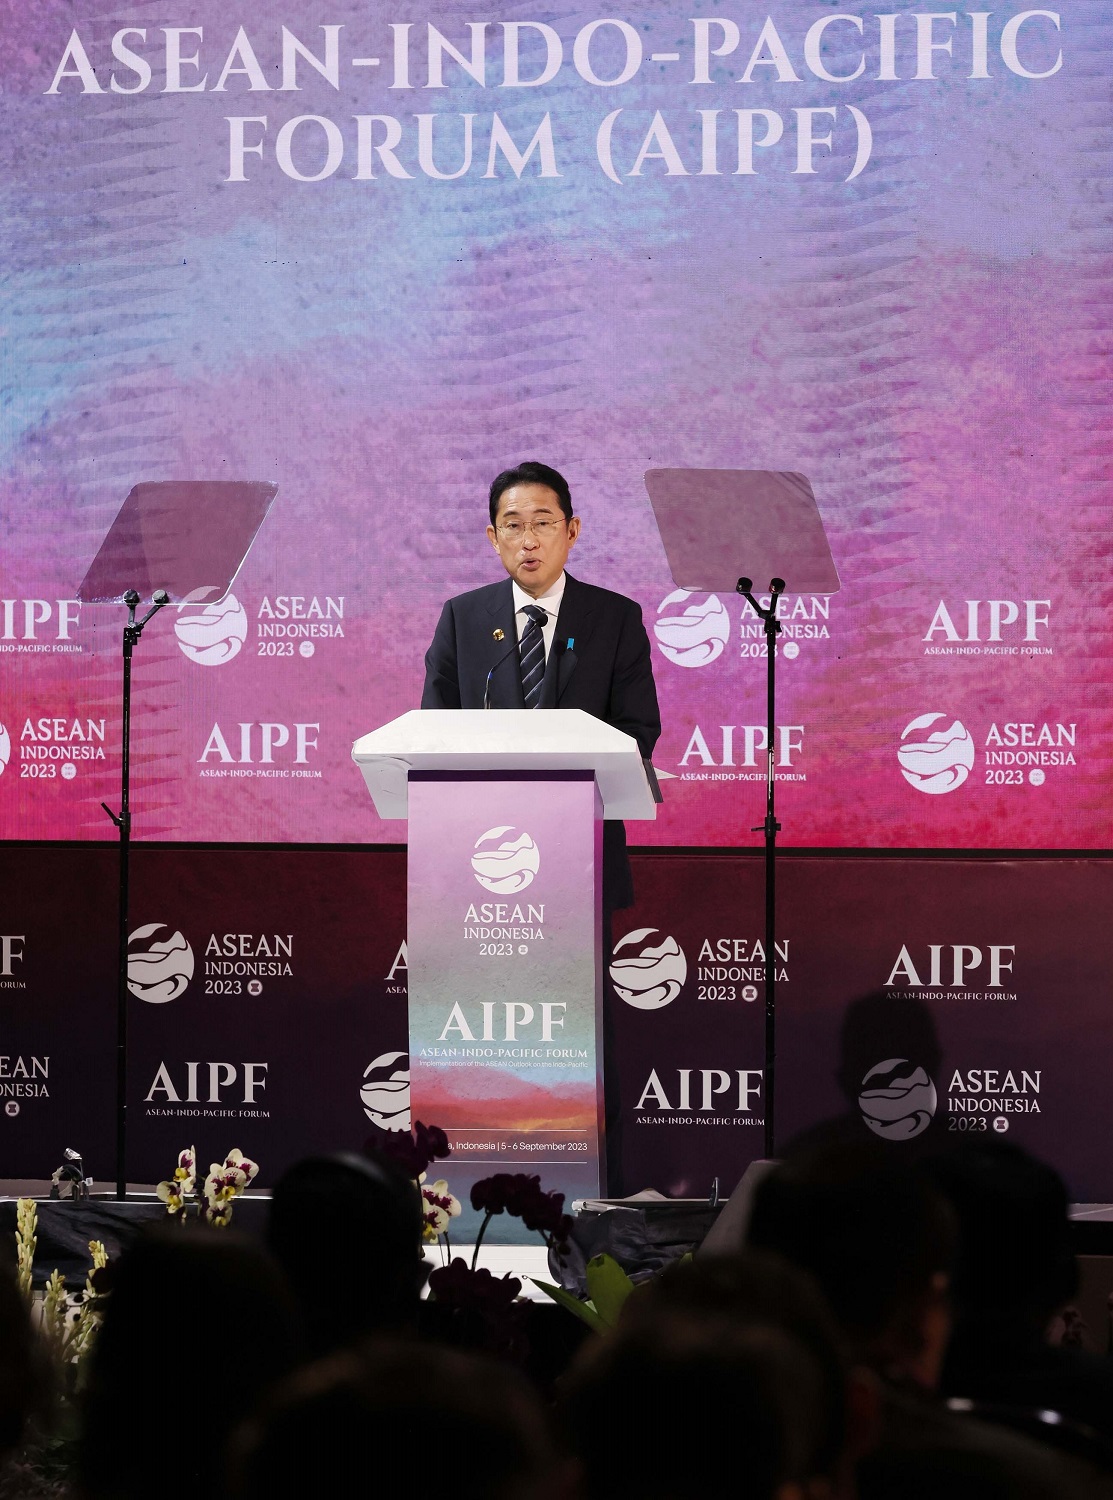 Prime Minister Kishida delivering a speech at the ASEAN-Indo-Pacific Forum (5)